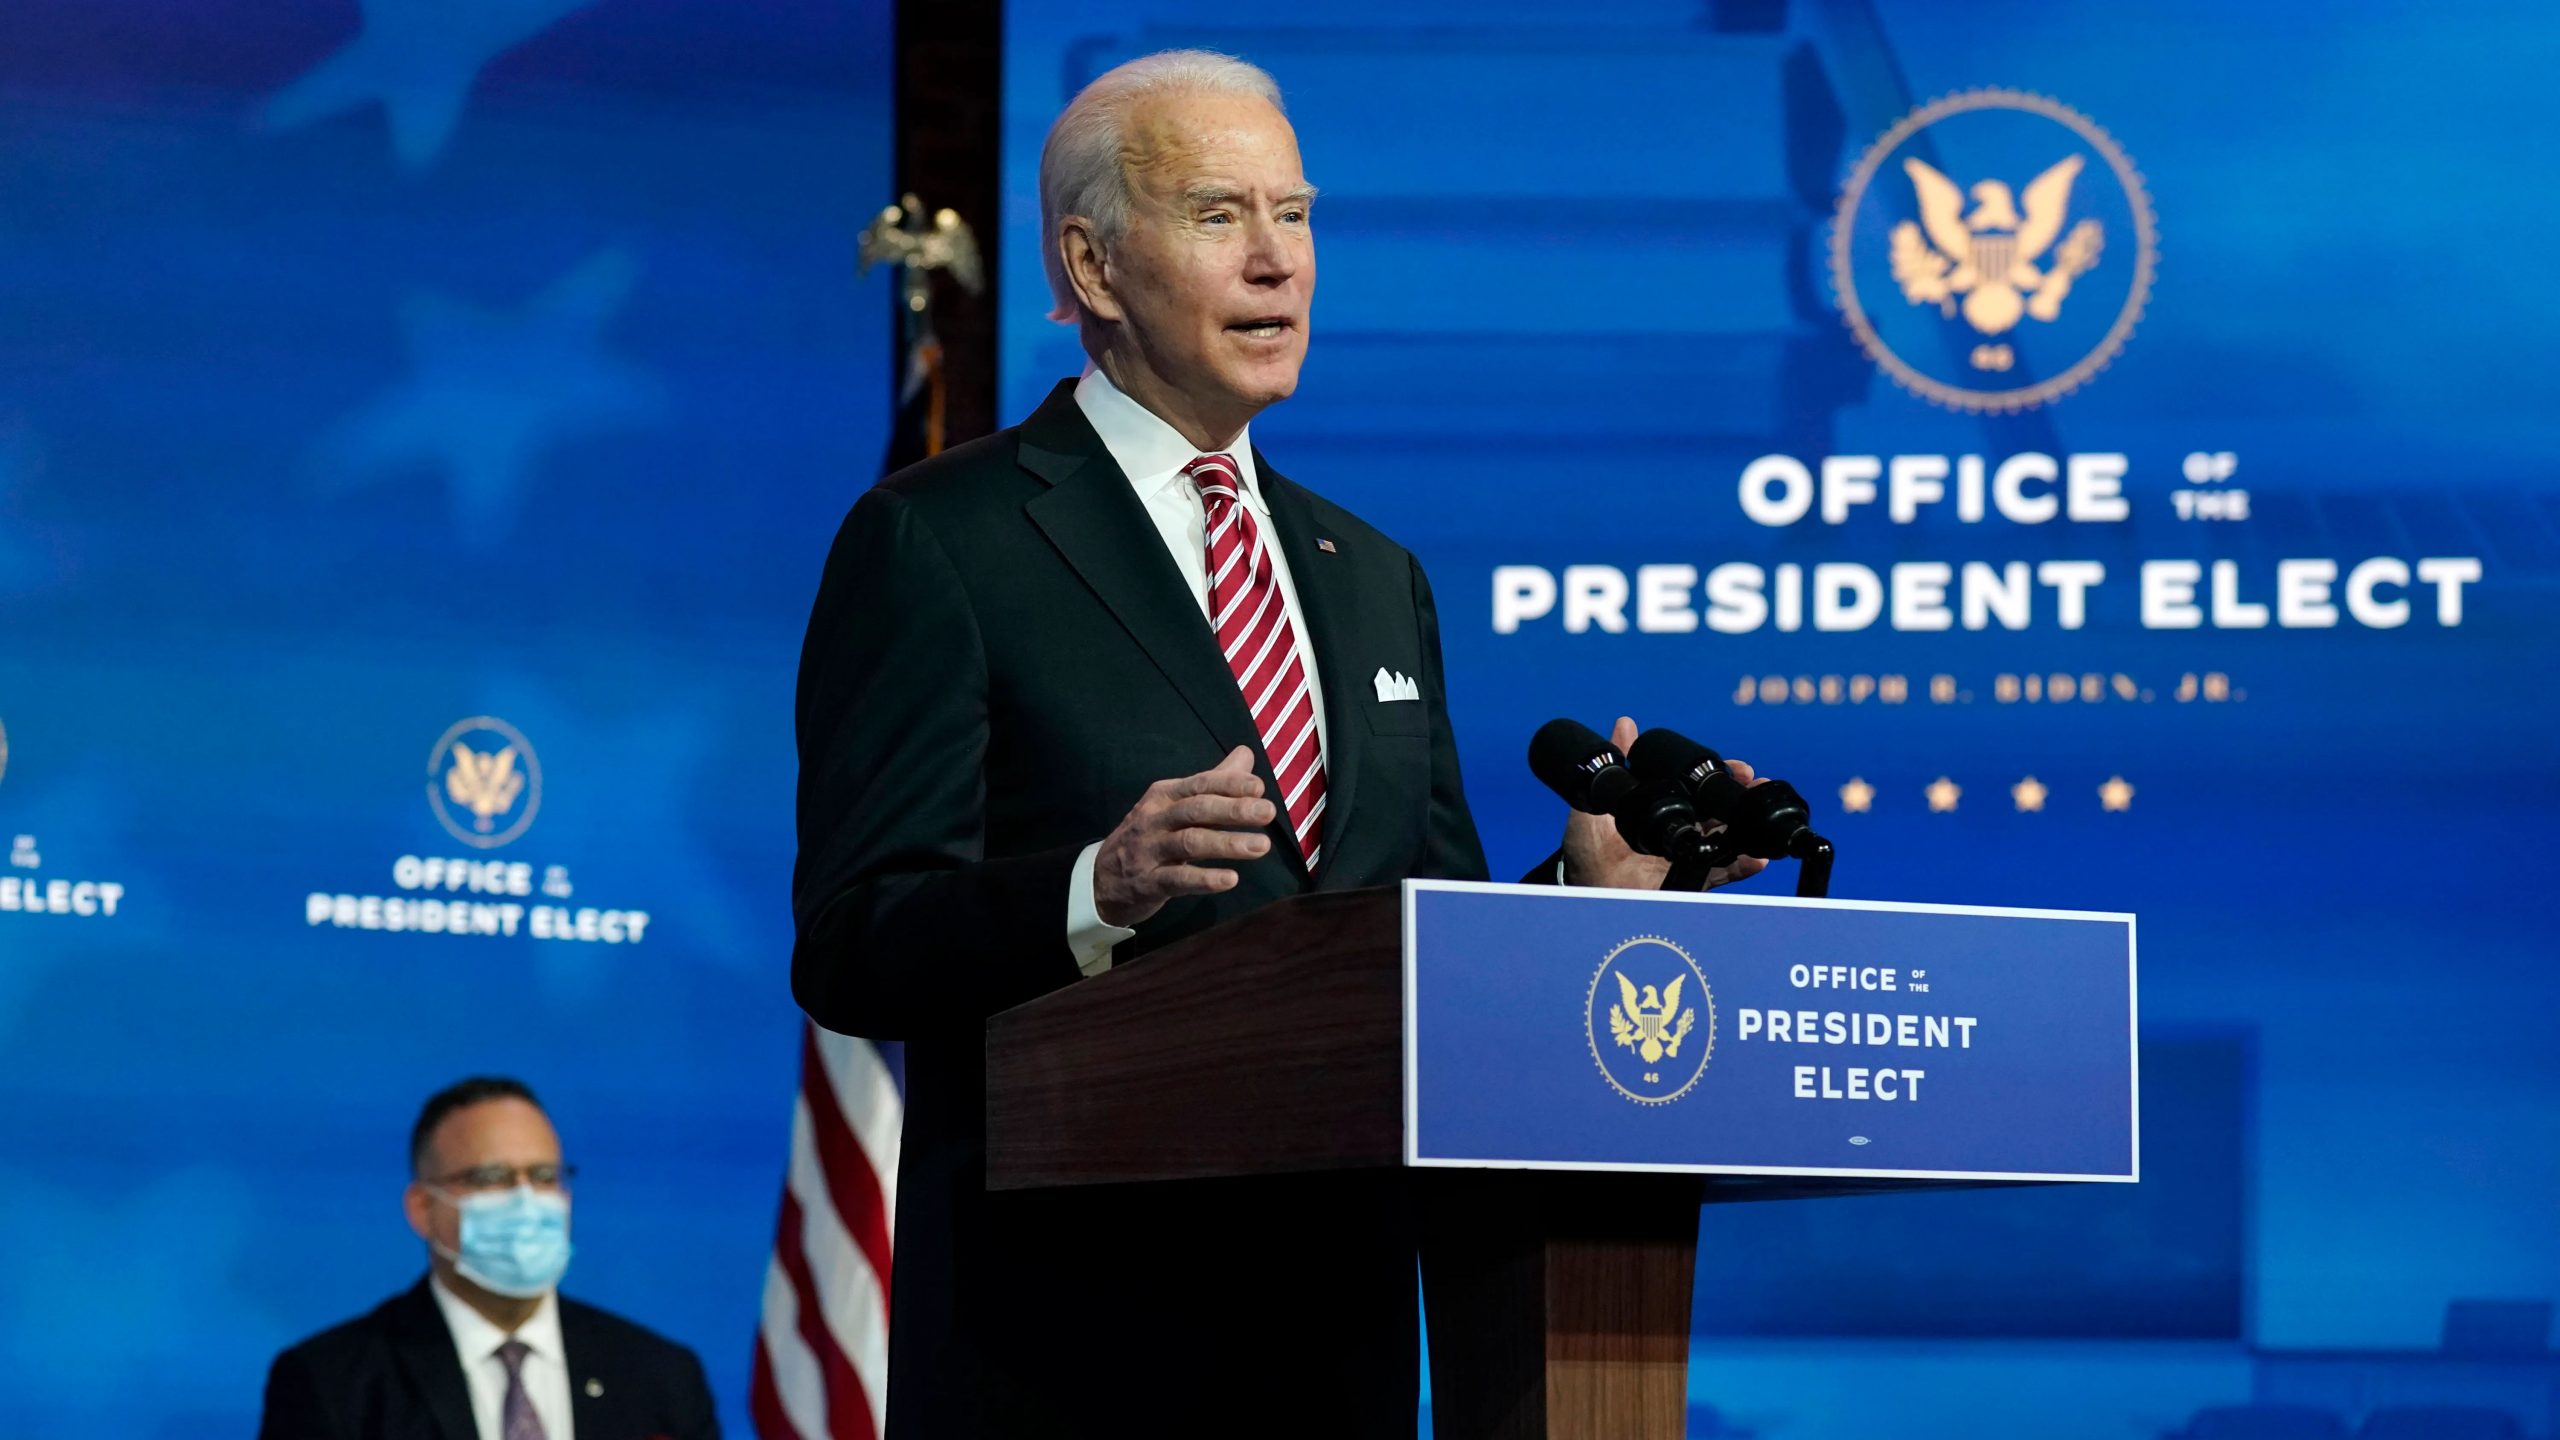 Biden inauguration to focus on unity, with strong turnout of ex-presidents